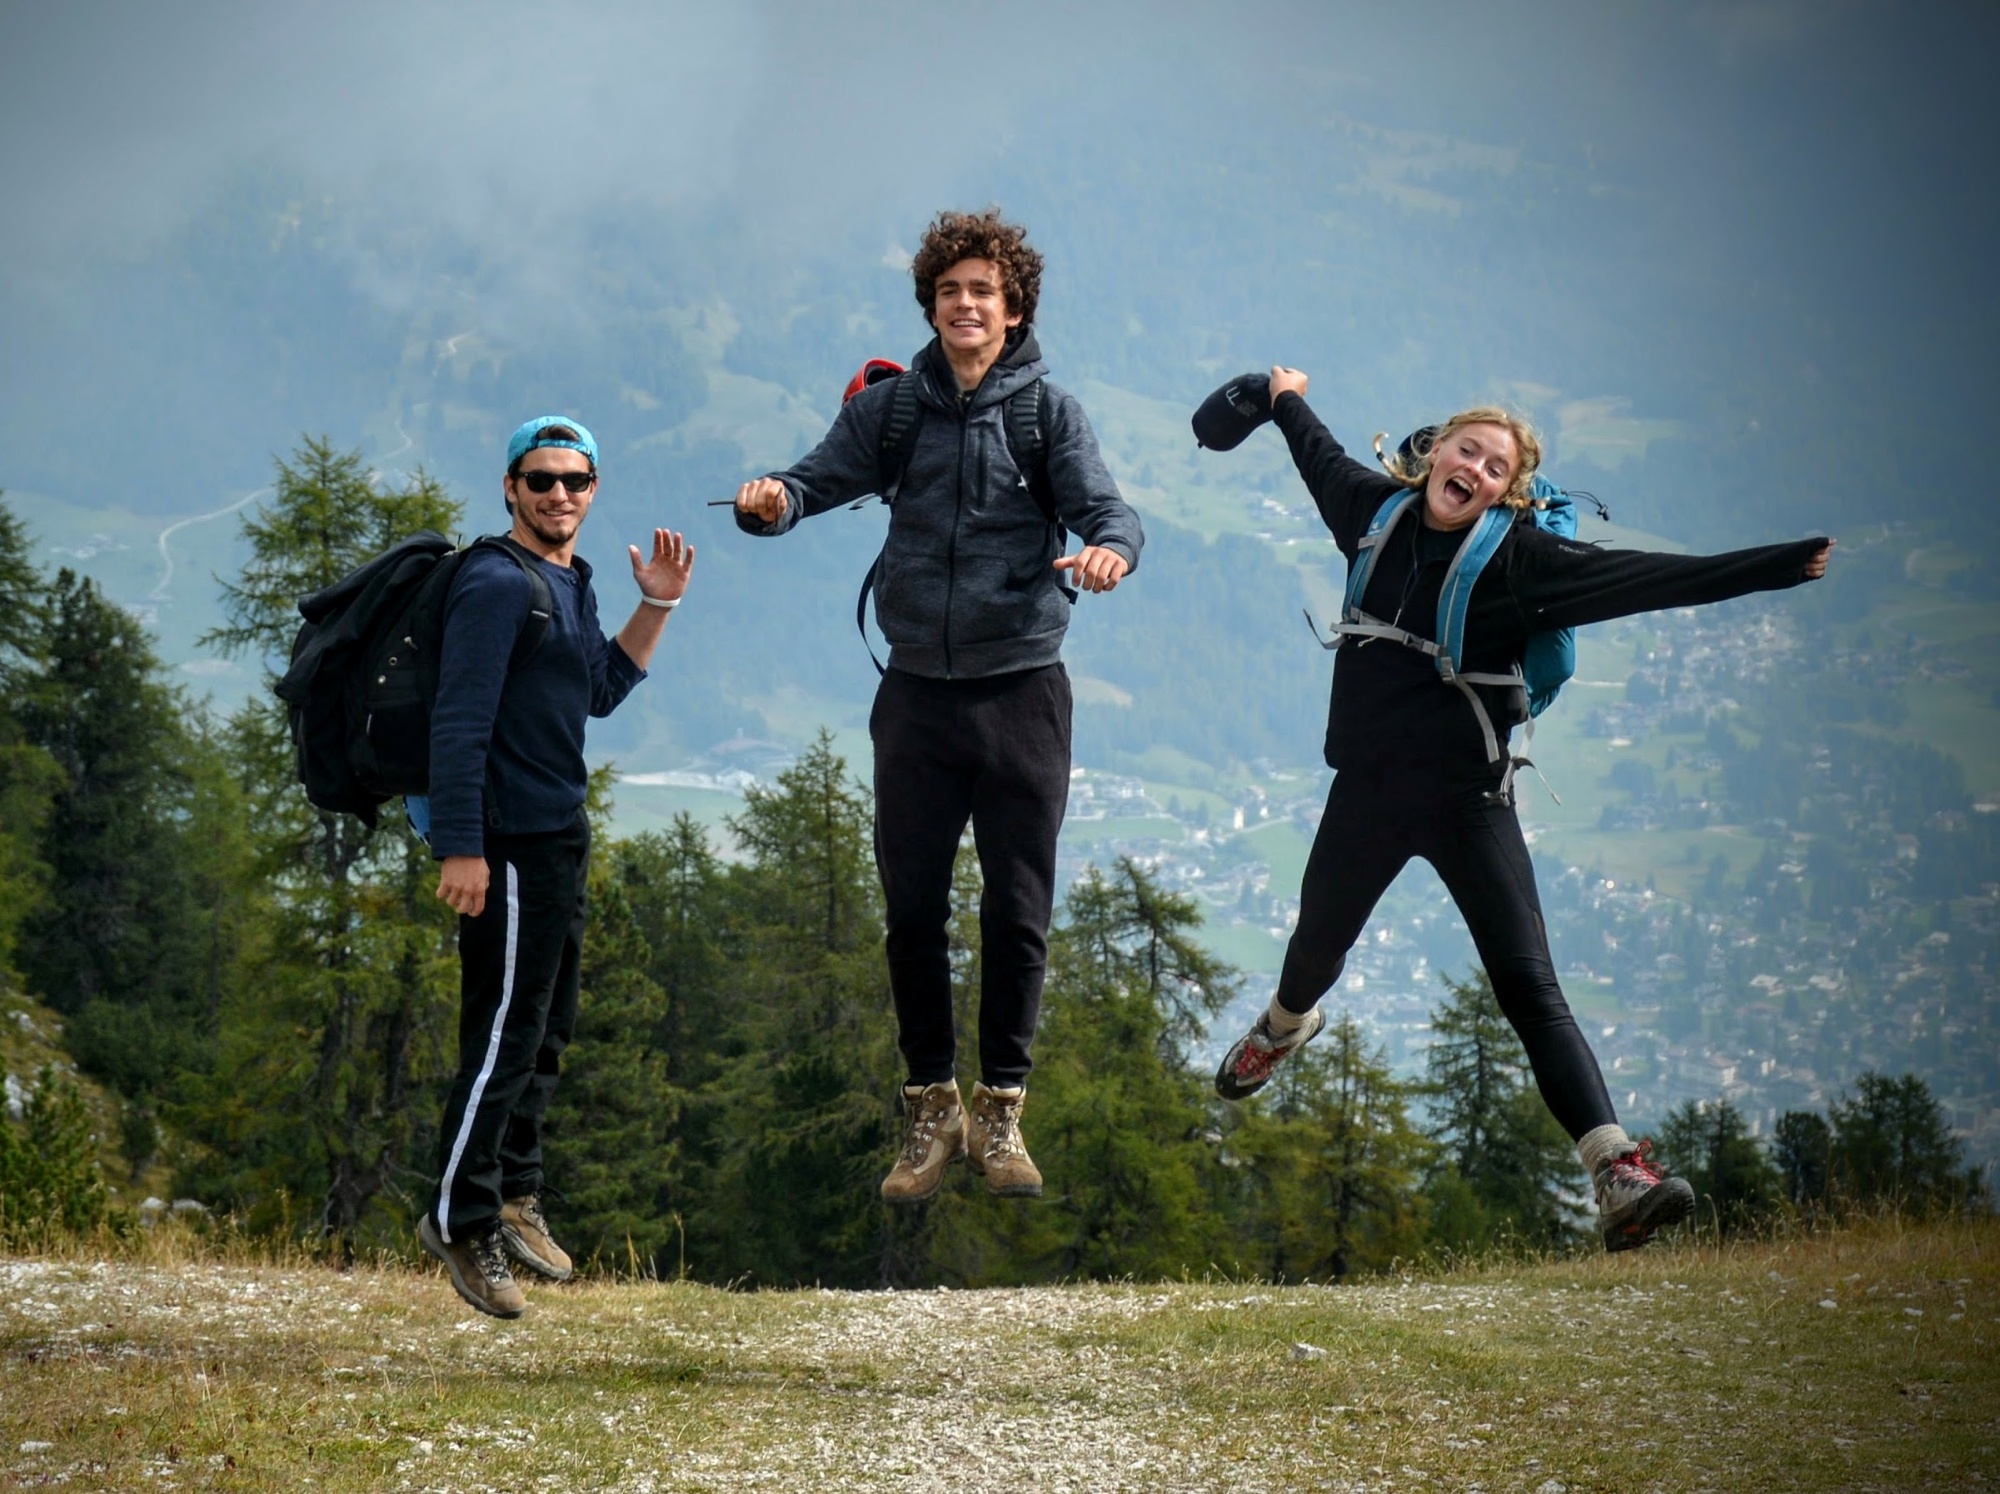 Three UWC students jump for joy as they reach the top of a mountain.